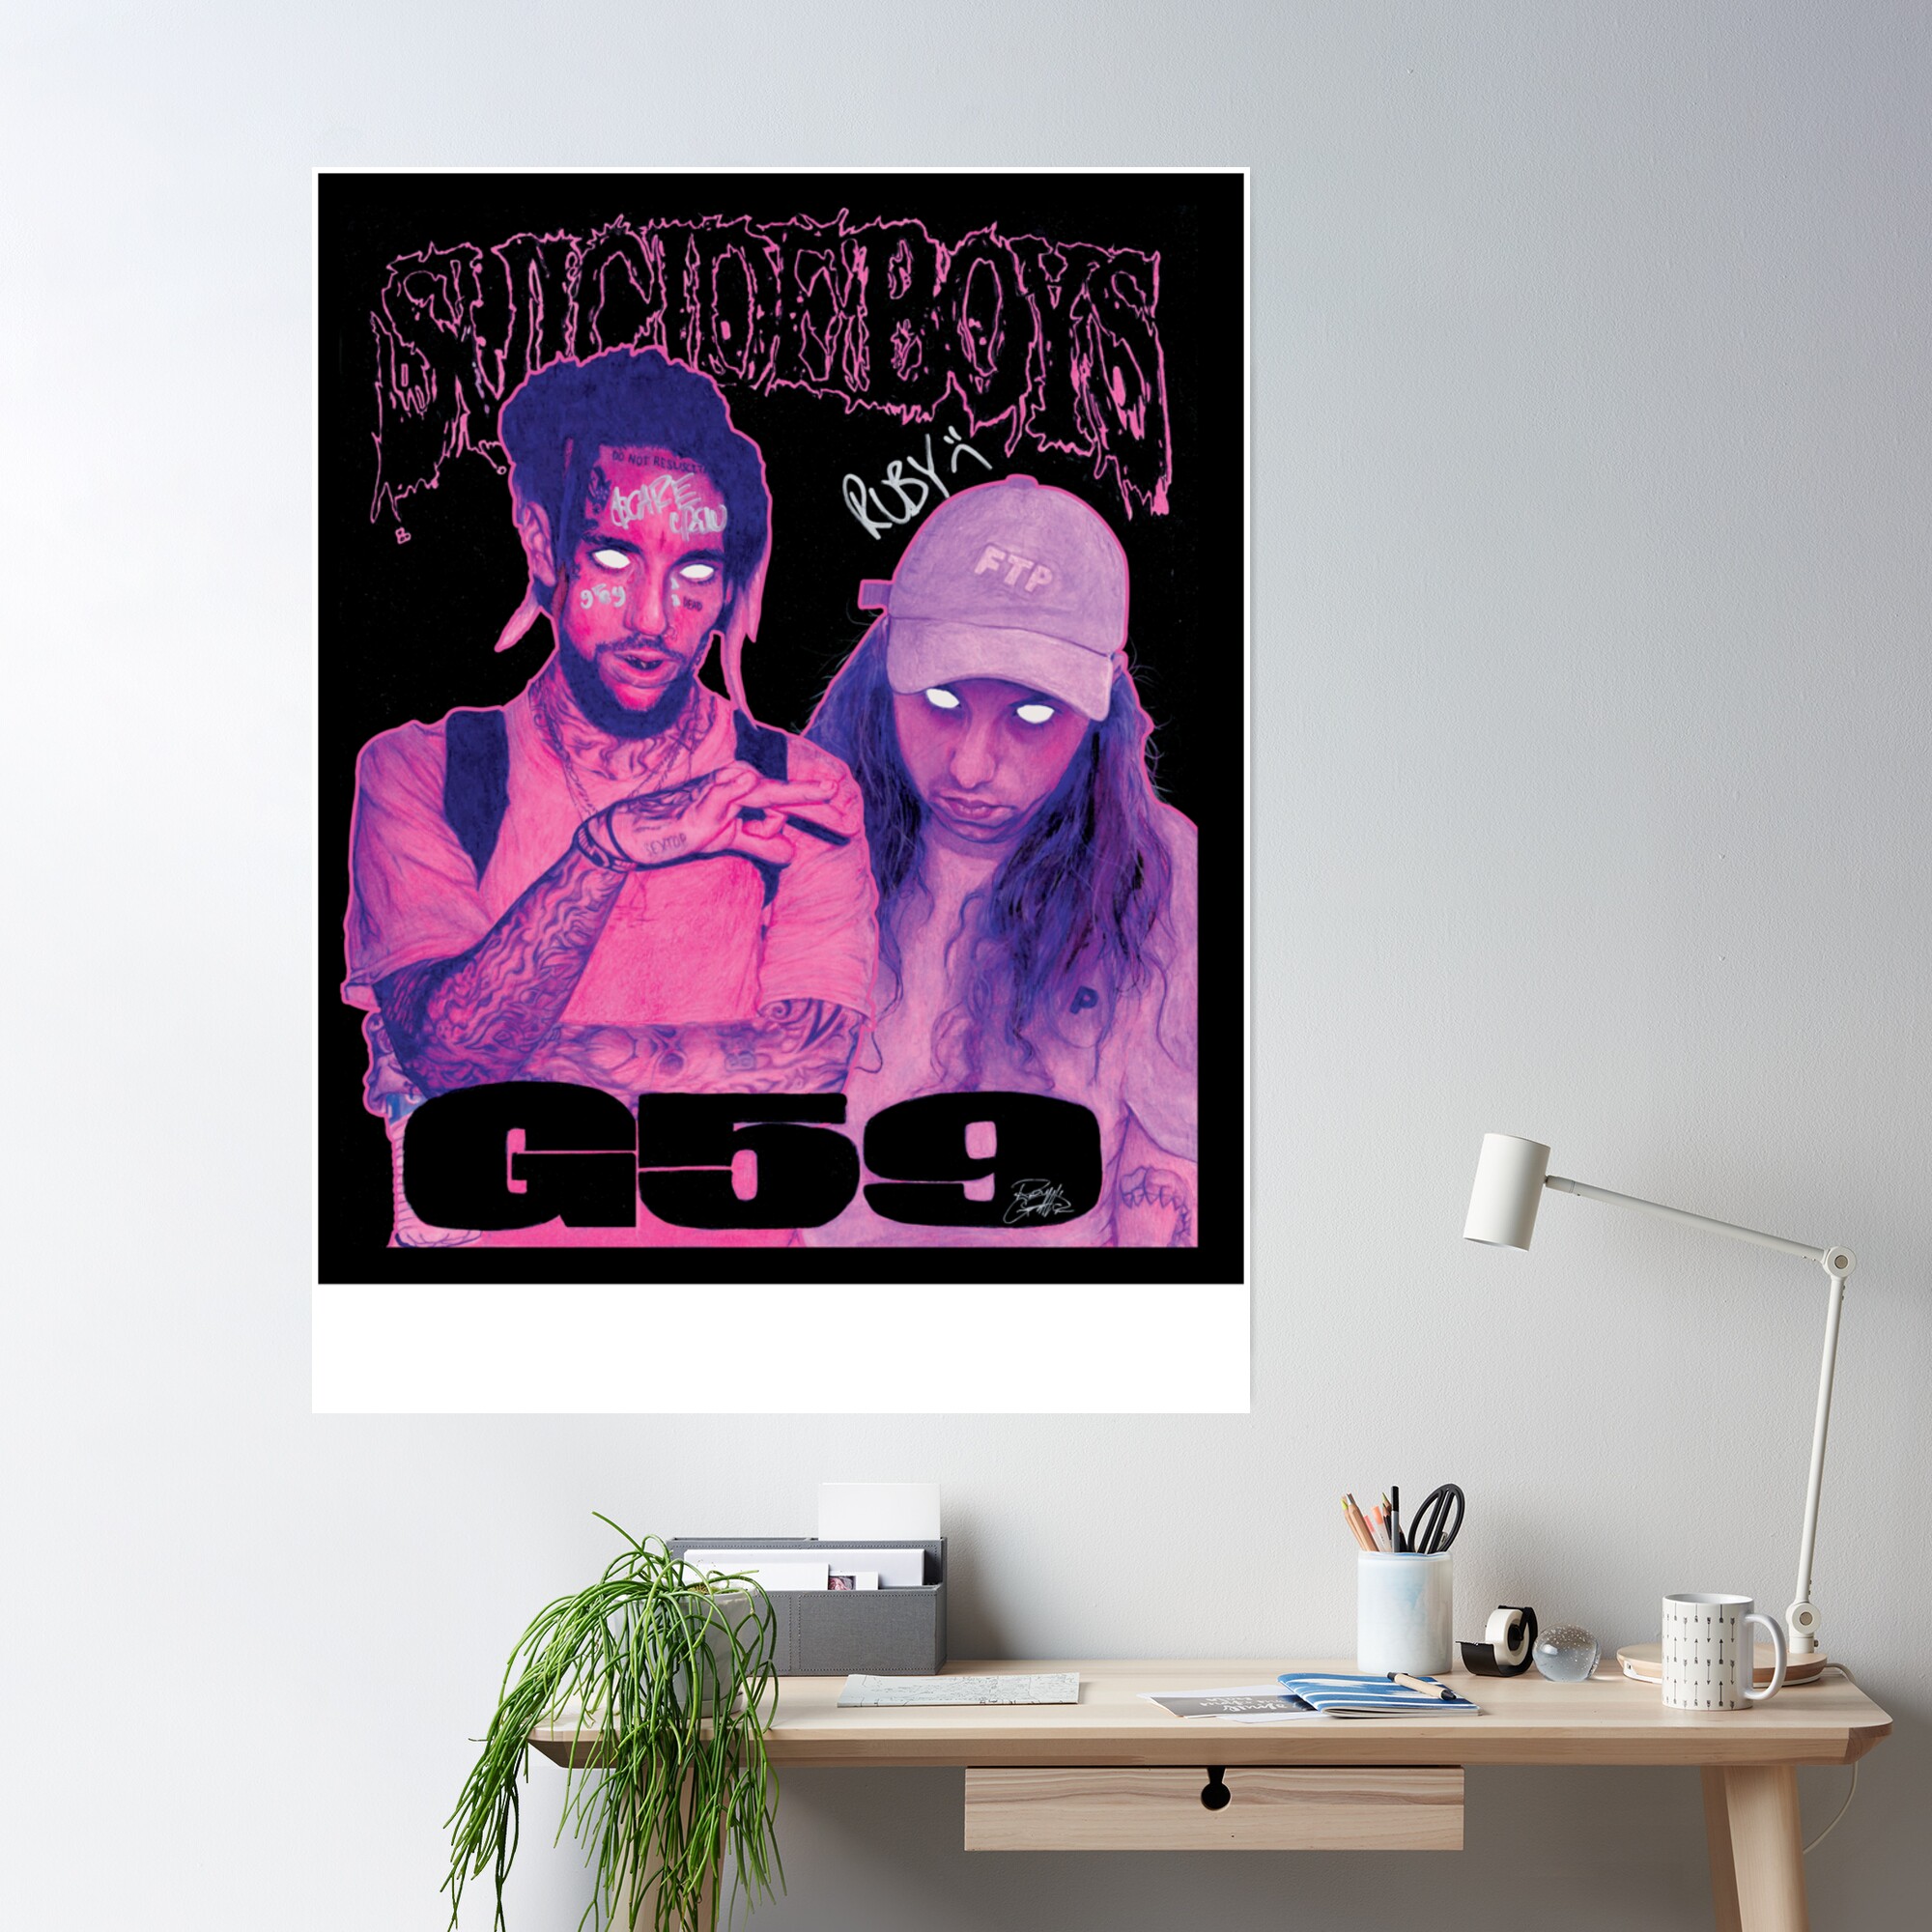 cposterlargesquare product2000x2000 1 - Suicideboys Shop